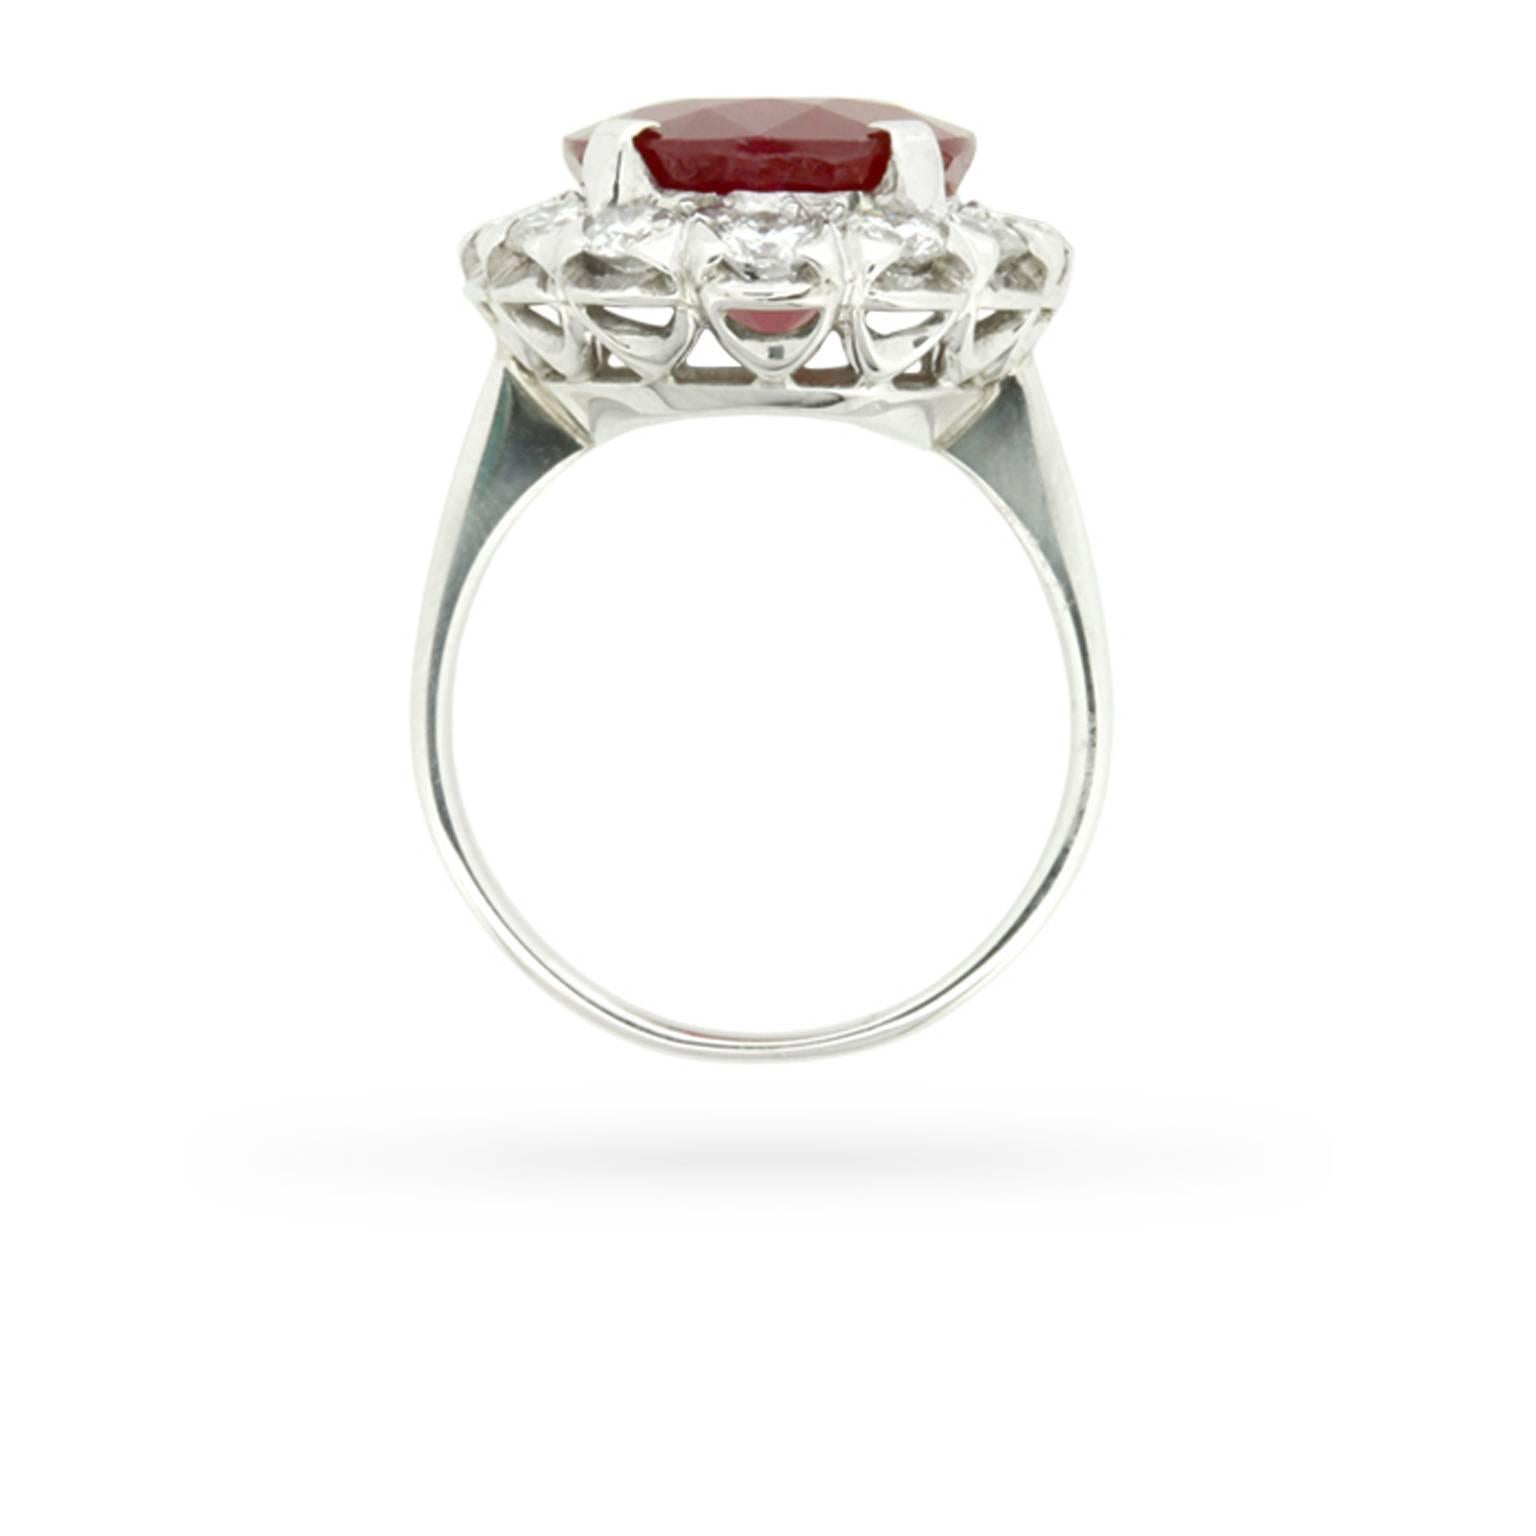 This stylish and sophisticated 1950s era ring is set to show off a tantalising 7.91 carat oval-shaped faceted ruby amid a halo of twinkling high-quality round brilliant cut diamonds totalling 1.12 carats, all set within a decorative openwork gallery